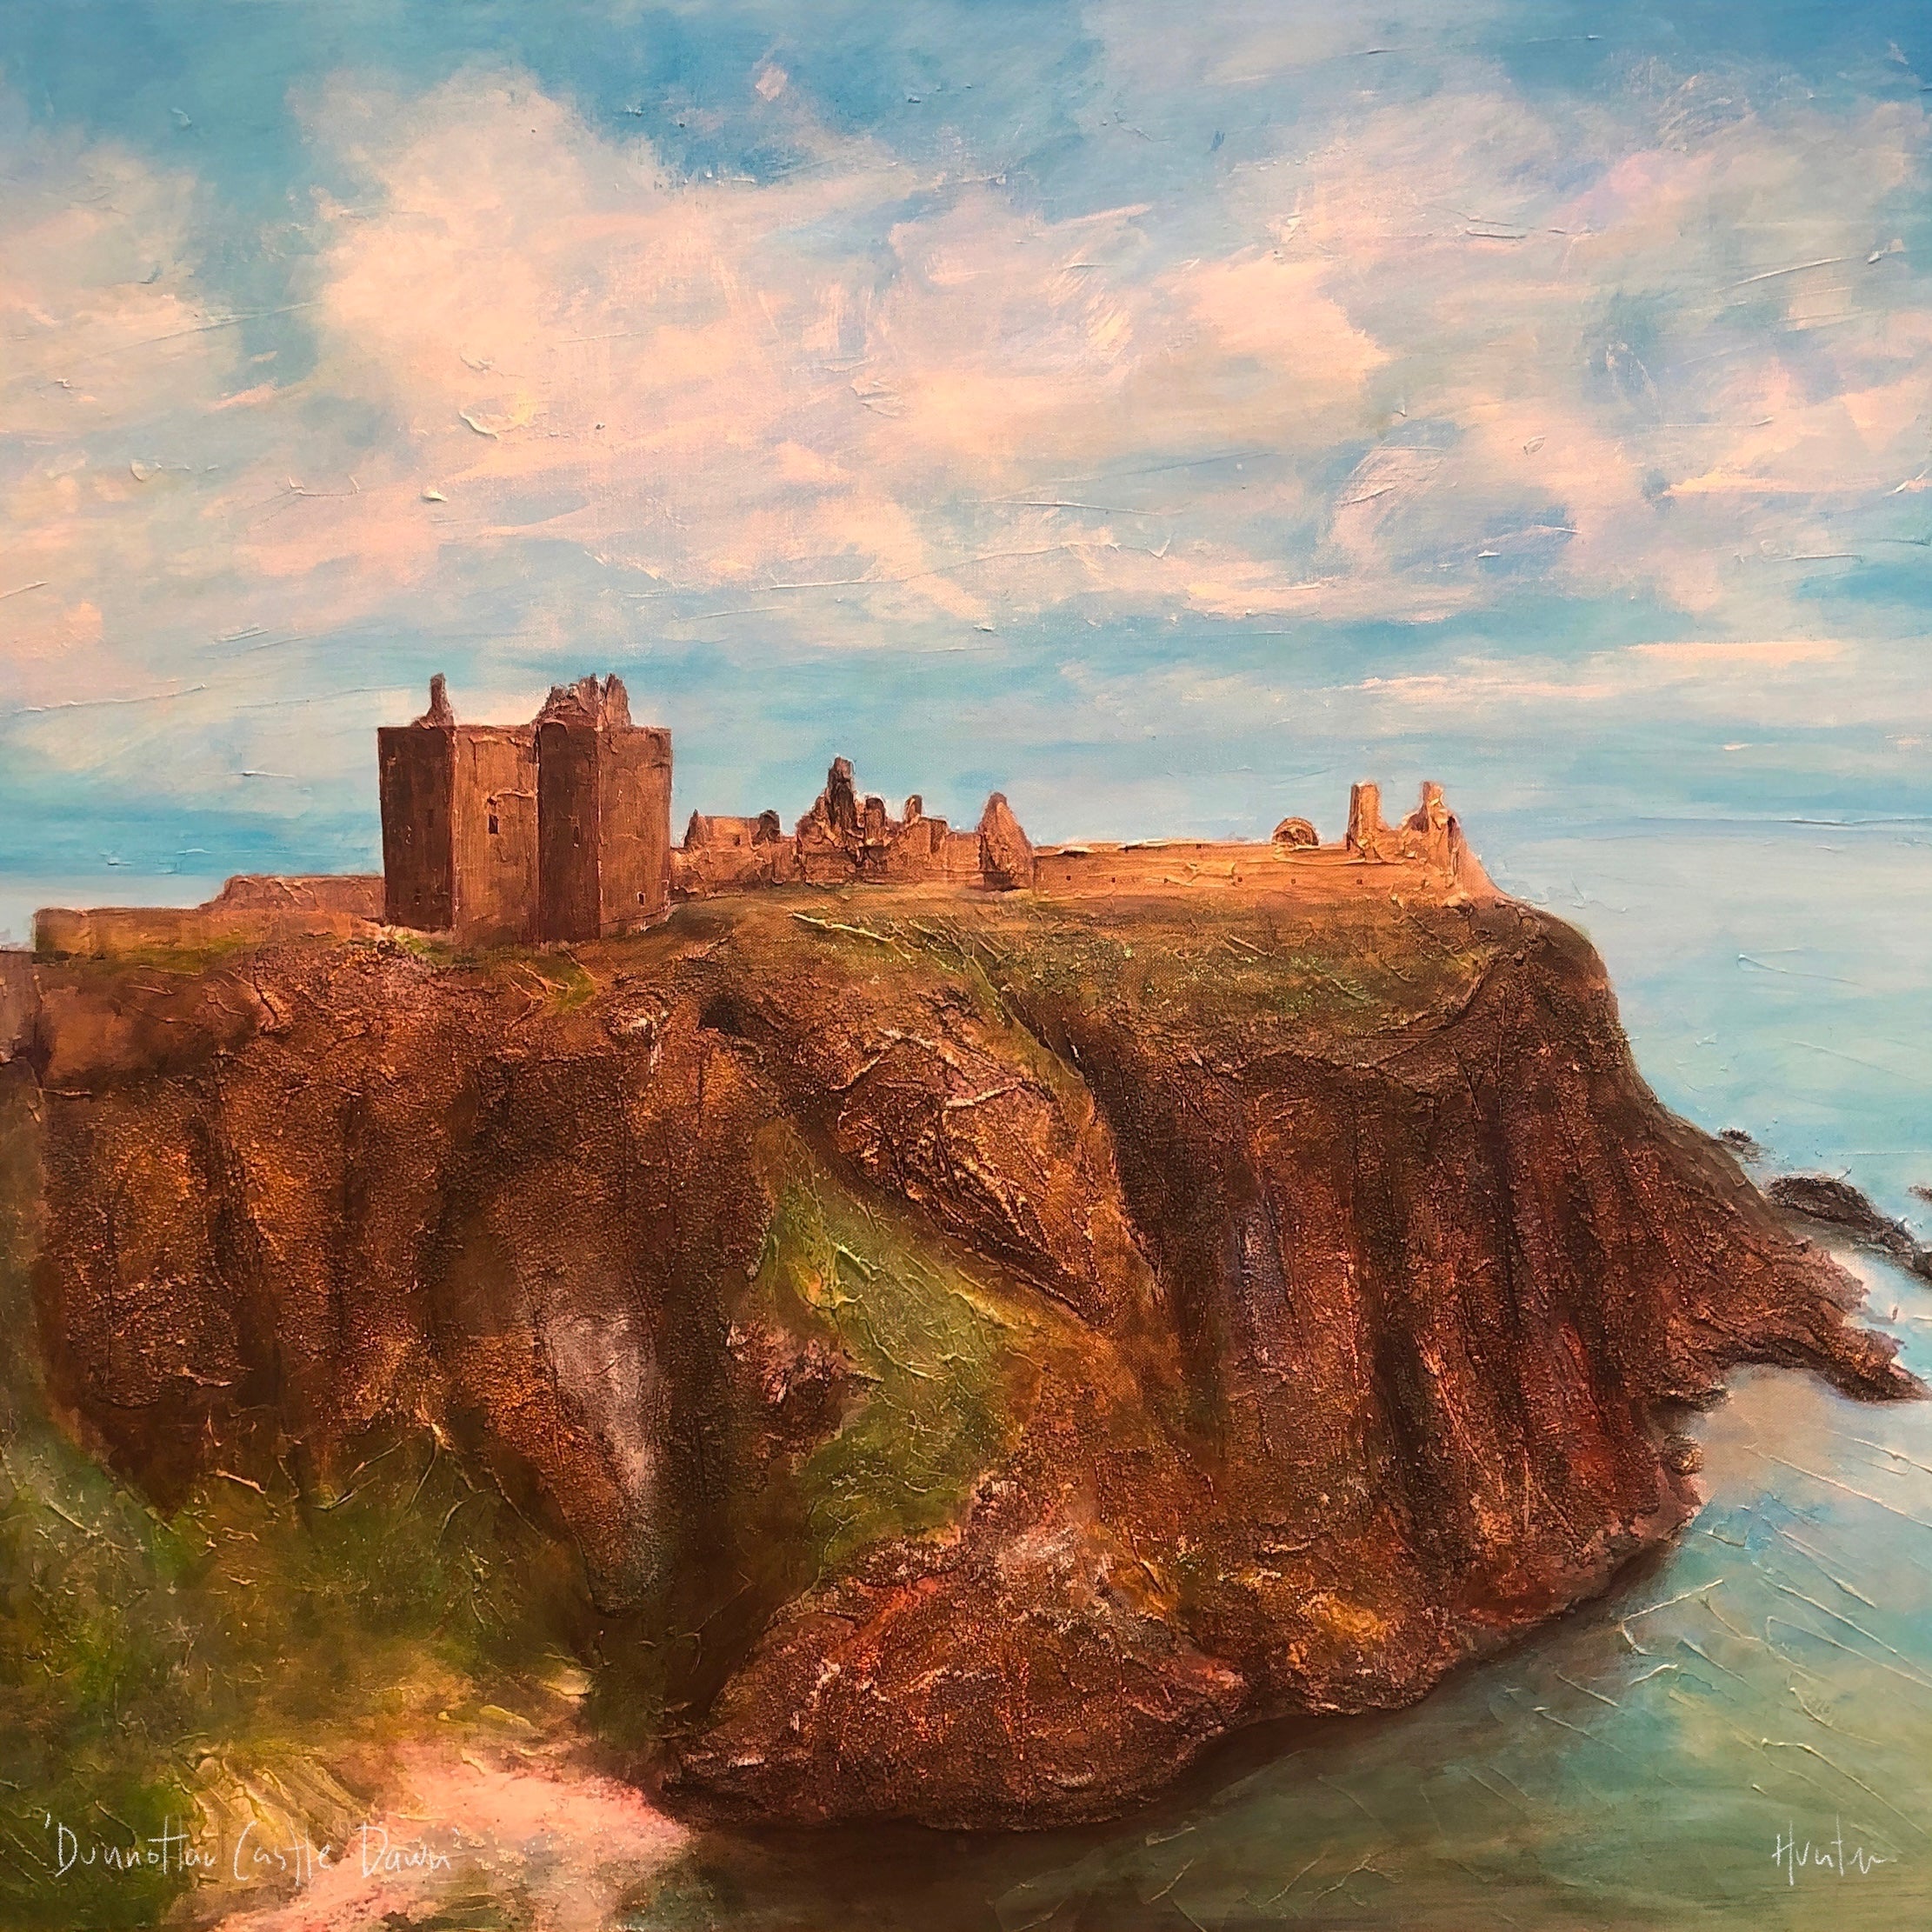 Dunnottar Castle | Scotland In Your Pocket Art Print-Scotland In Your Pocket Framed Prints-Historic & Iconic Scotland Art Gallery-Paintings, Prints, Homeware, Art Gifts From Scotland By Scottish Artist Kevin Hunter